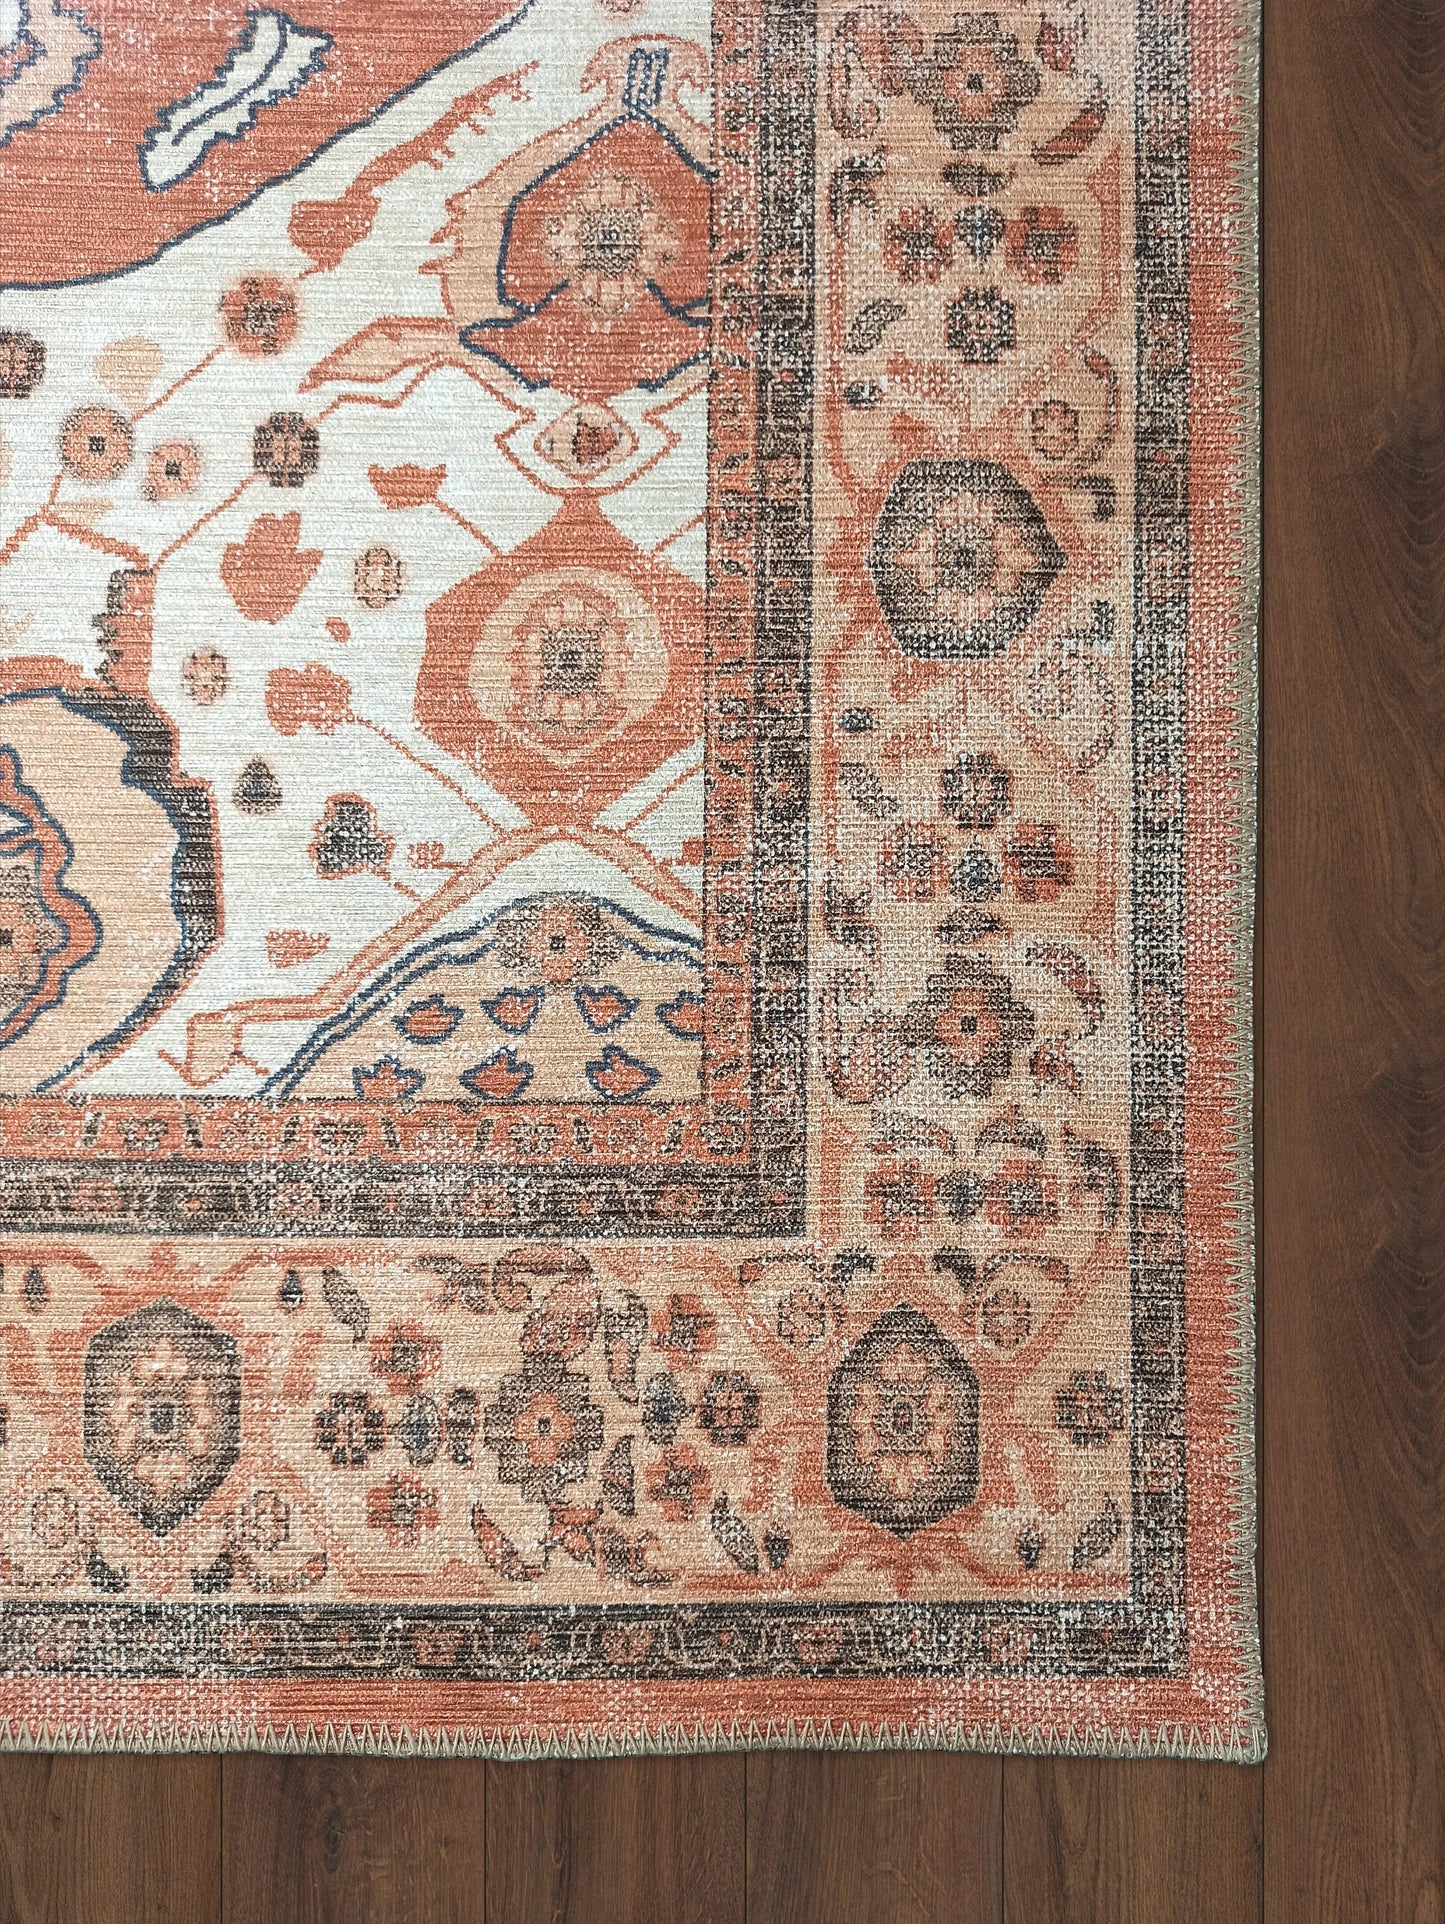 Terracotta Persian Vintage Rug, Shades of Burnt Orange with a touch of Brown Oriental Antique Heriz Inspired Area Rugs Living room Bedroom